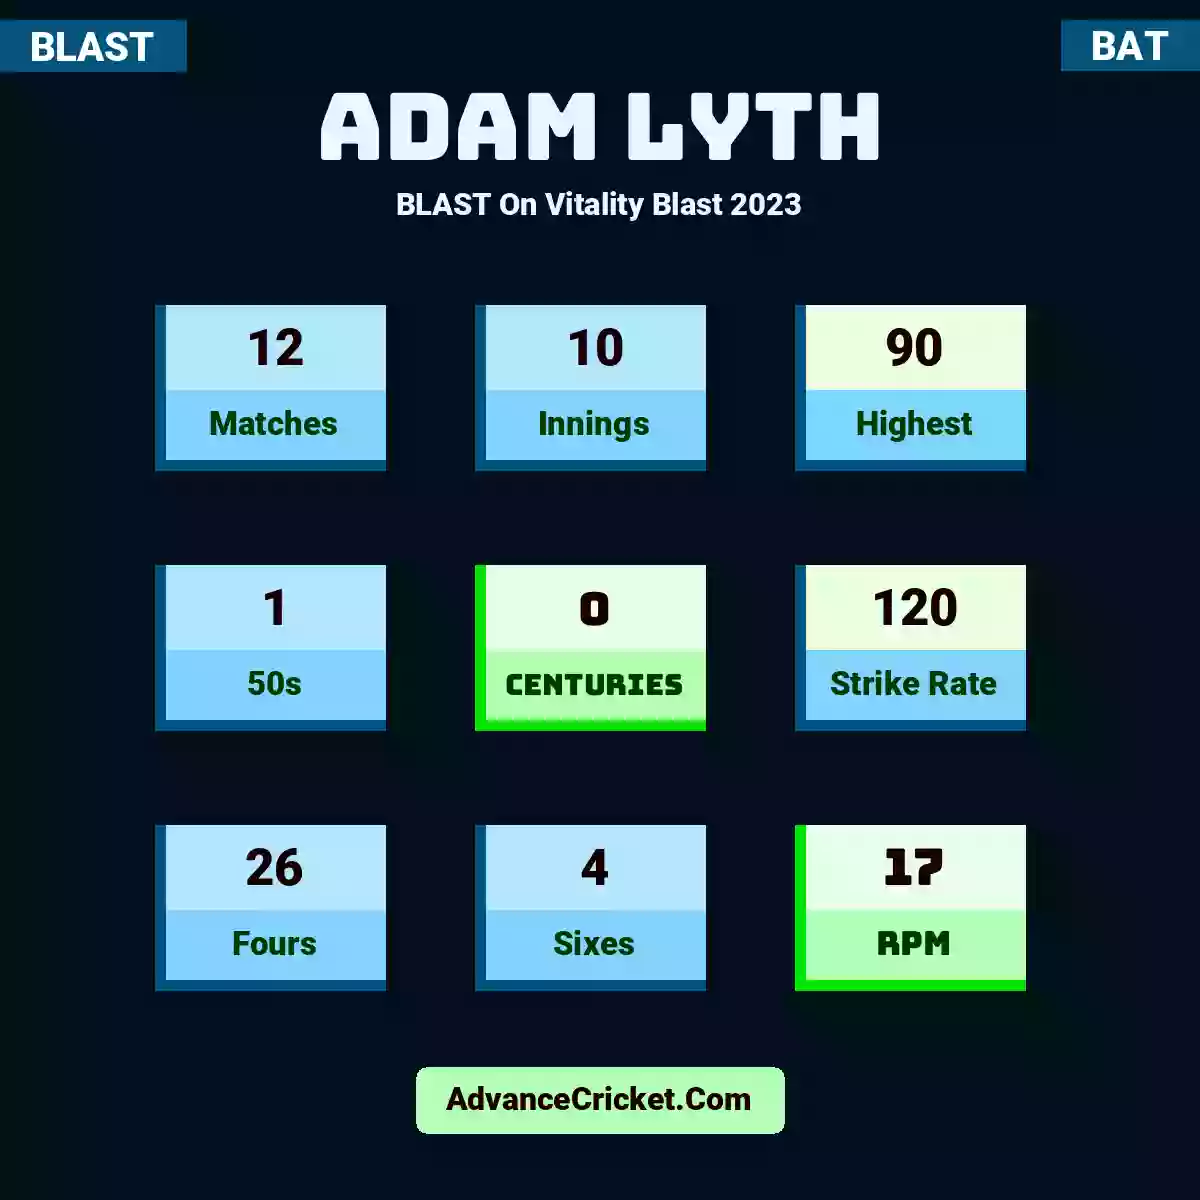 Adam Lyth BLAST  On Vitality Blast 2023, Adam Lyth played 12 matches, scored 90 runs as highest, 1 half-centuries, and 0 centuries, with a strike rate of 120. A.Lyth hit 26 fours and 4 sixes, with an RPM of 17.